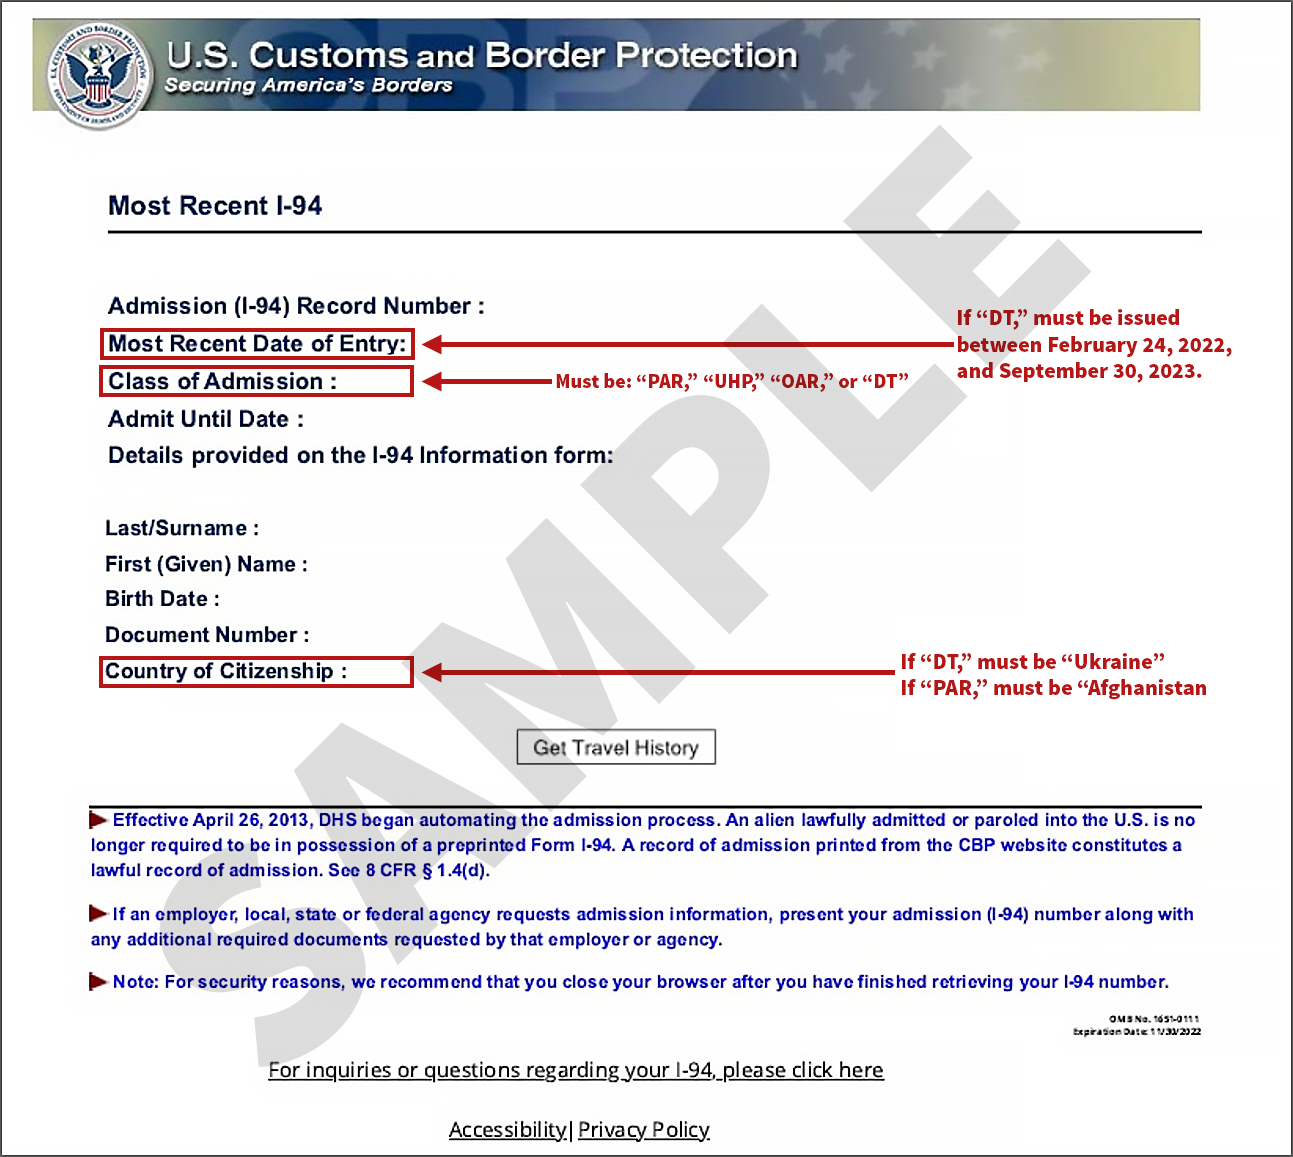 Form I-9 Acceptable Documents | Uscis within What is an USCIS I-9 Form?